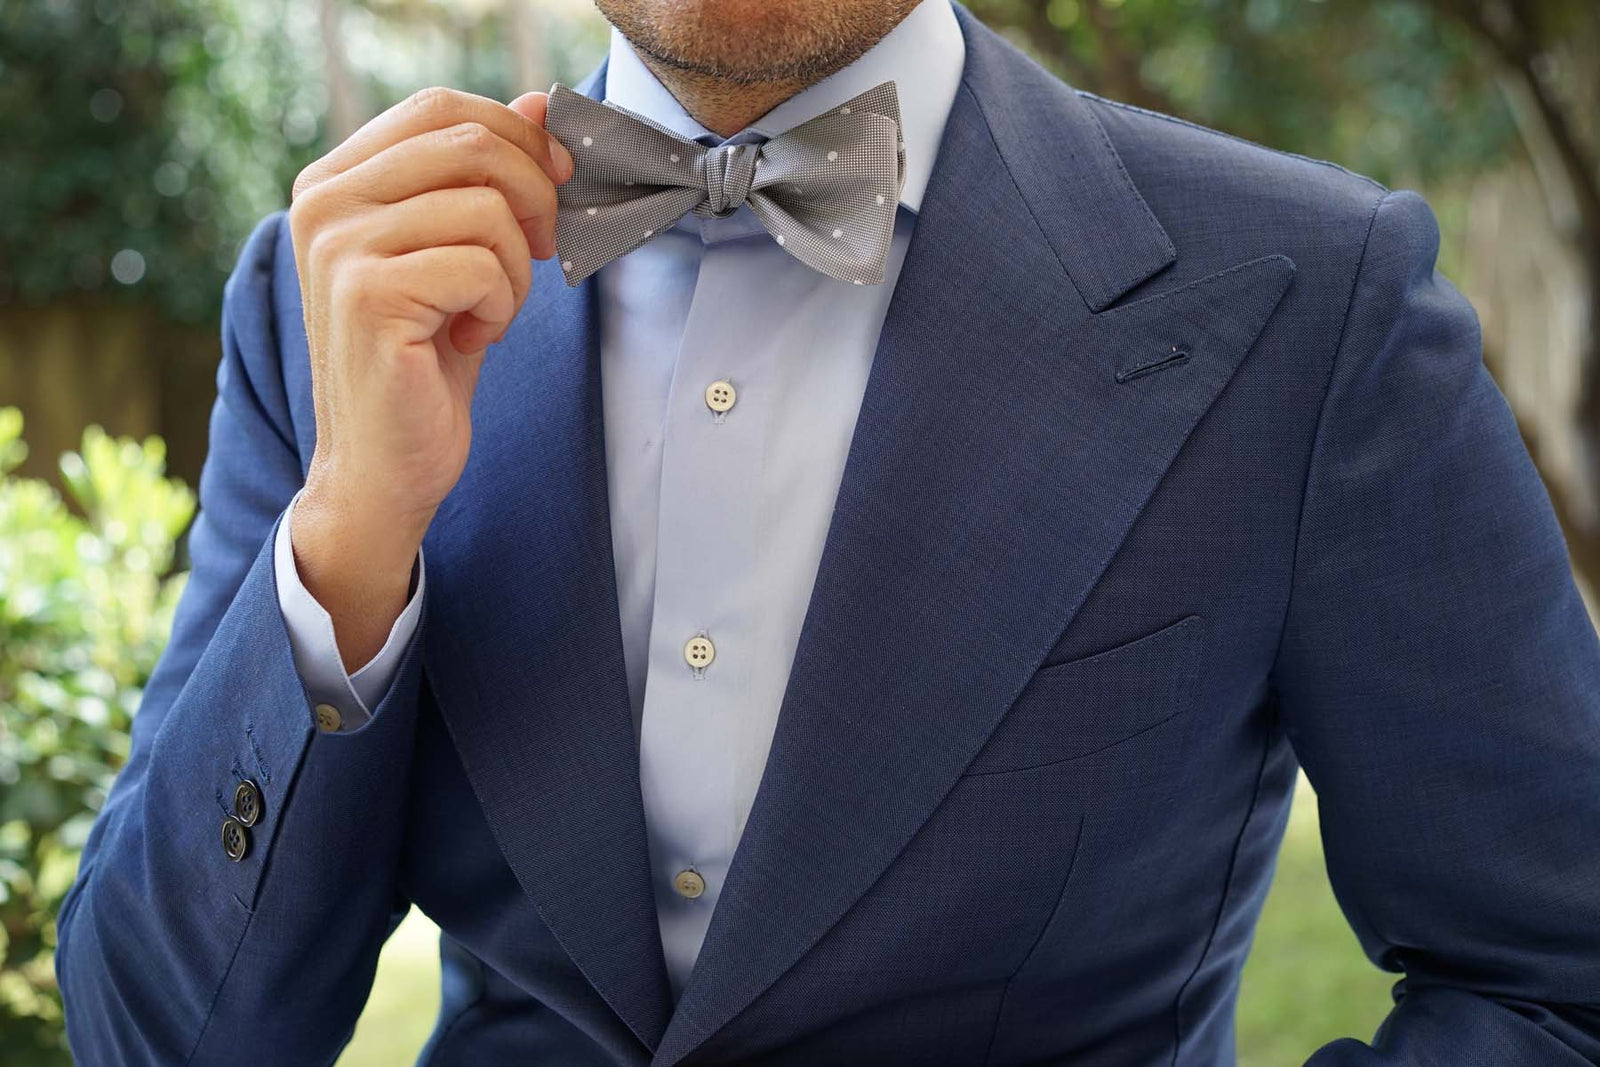 Grey with White Polka Dots Bow Tie Untied | Men's Self-Tied Bowties AU ...